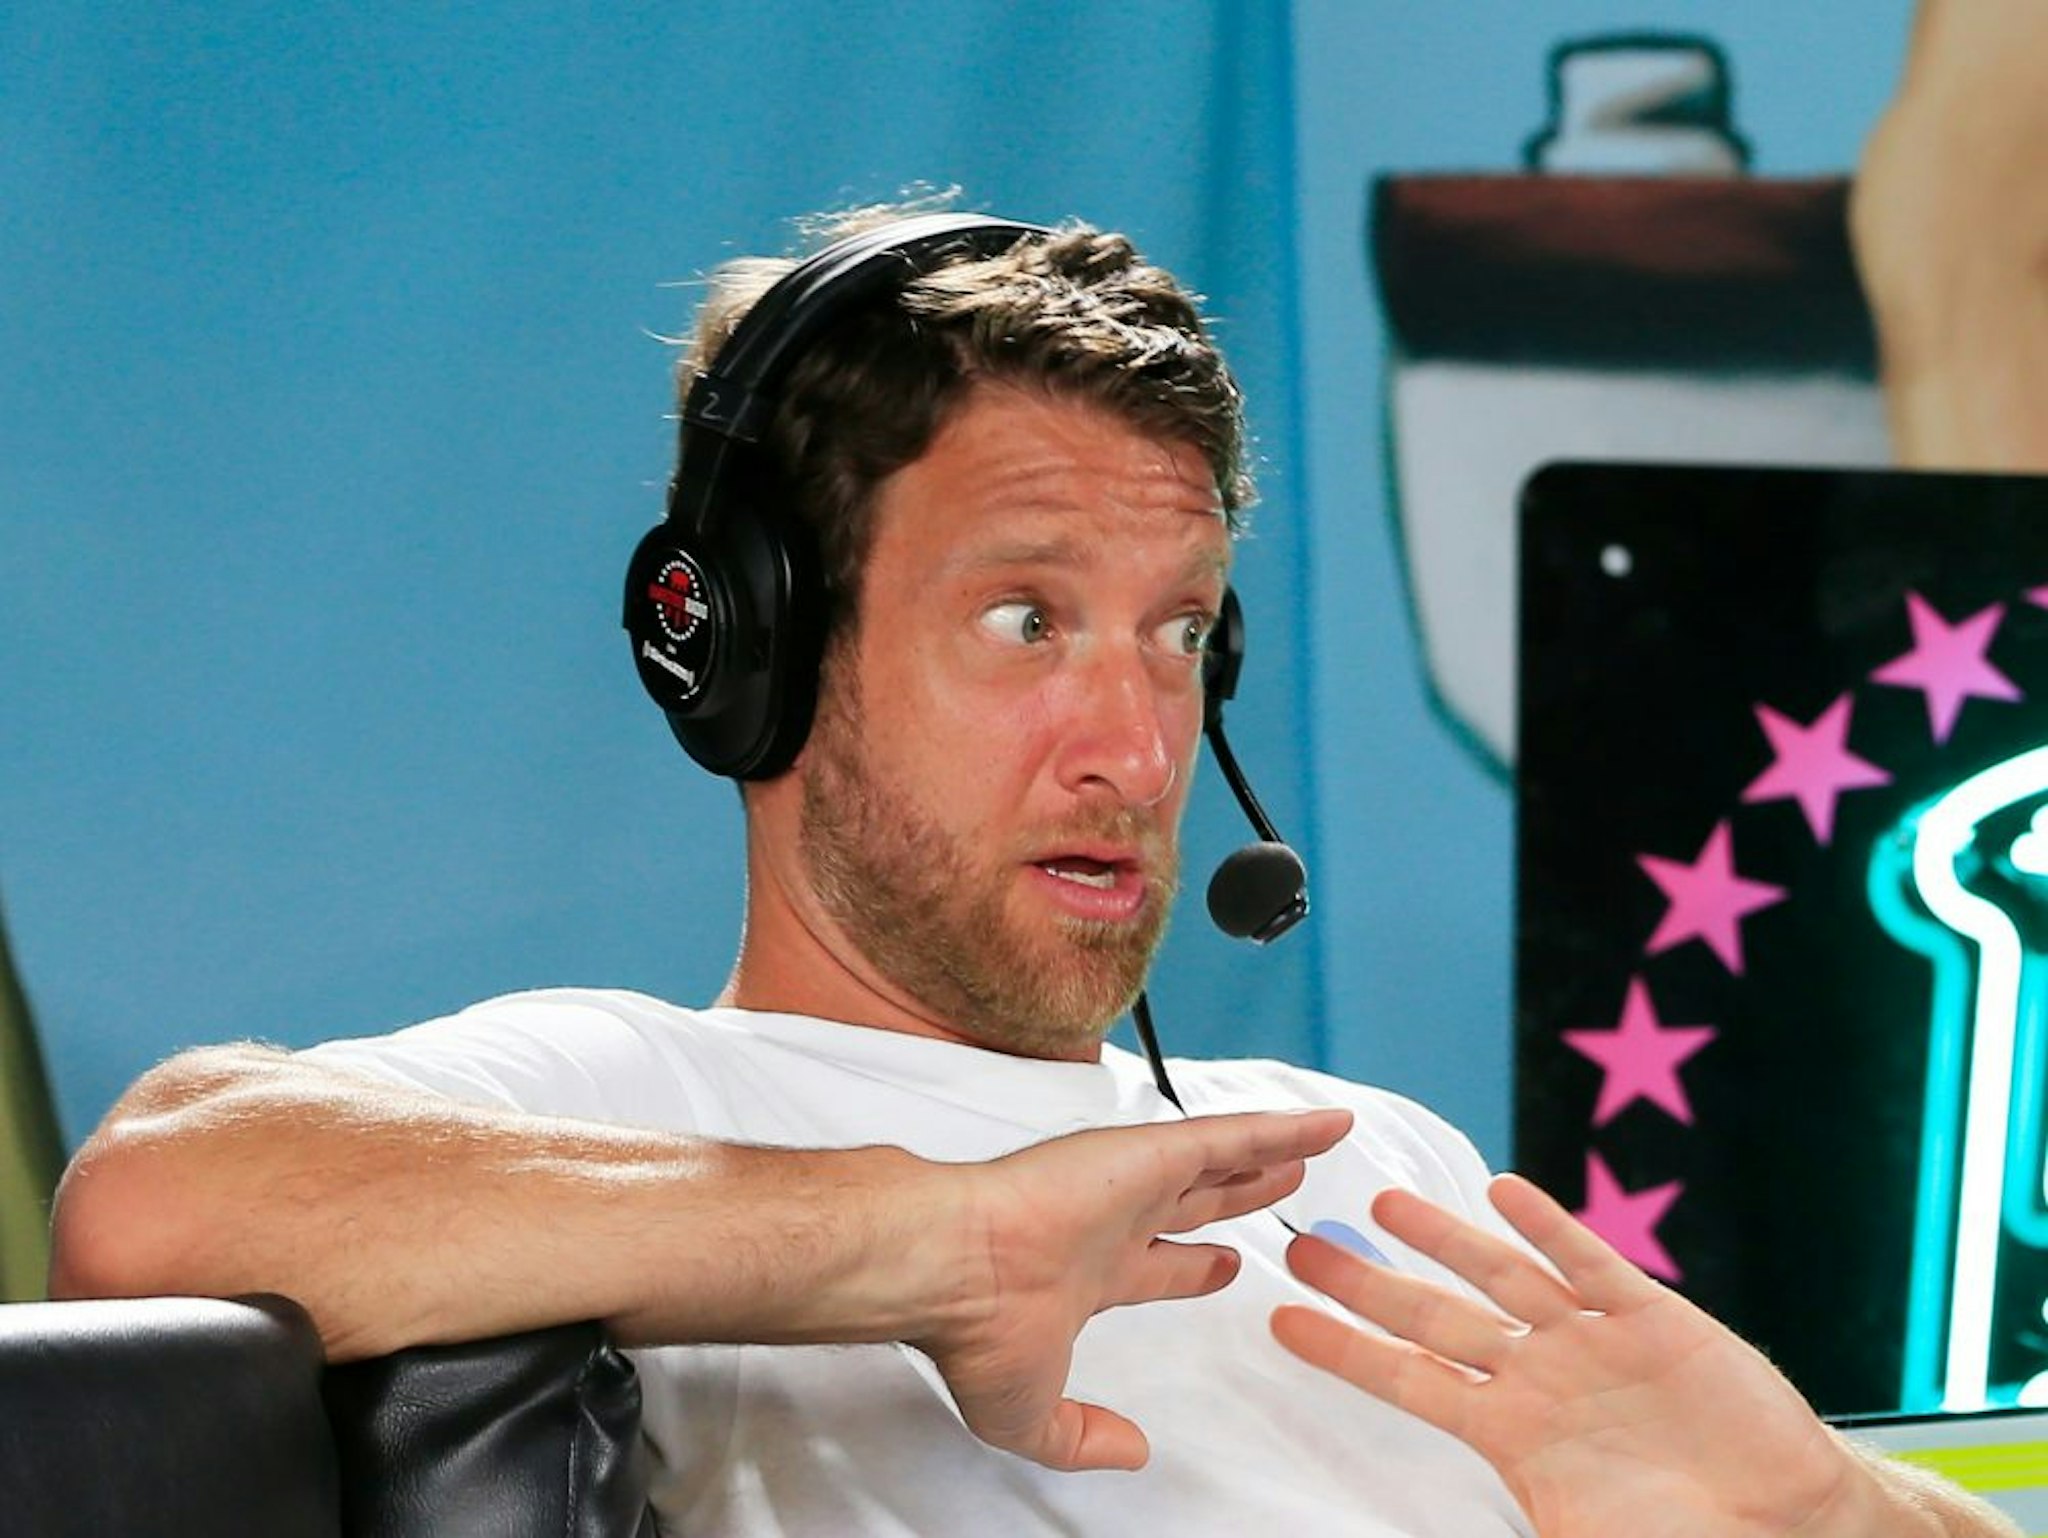 MIAMI BEACH, FLORIDA - JANUARY 30: David Portnoy, founder of Barstool Sports, speaks during a radio broadcast prior to Super Bowl LIV on January 30, 2020 in Miami Beach, Florida. The San Francisco 49ers will face the Kansas City Chiefs in the 54th playing of the Super Bowl, Sunday February 2nd.